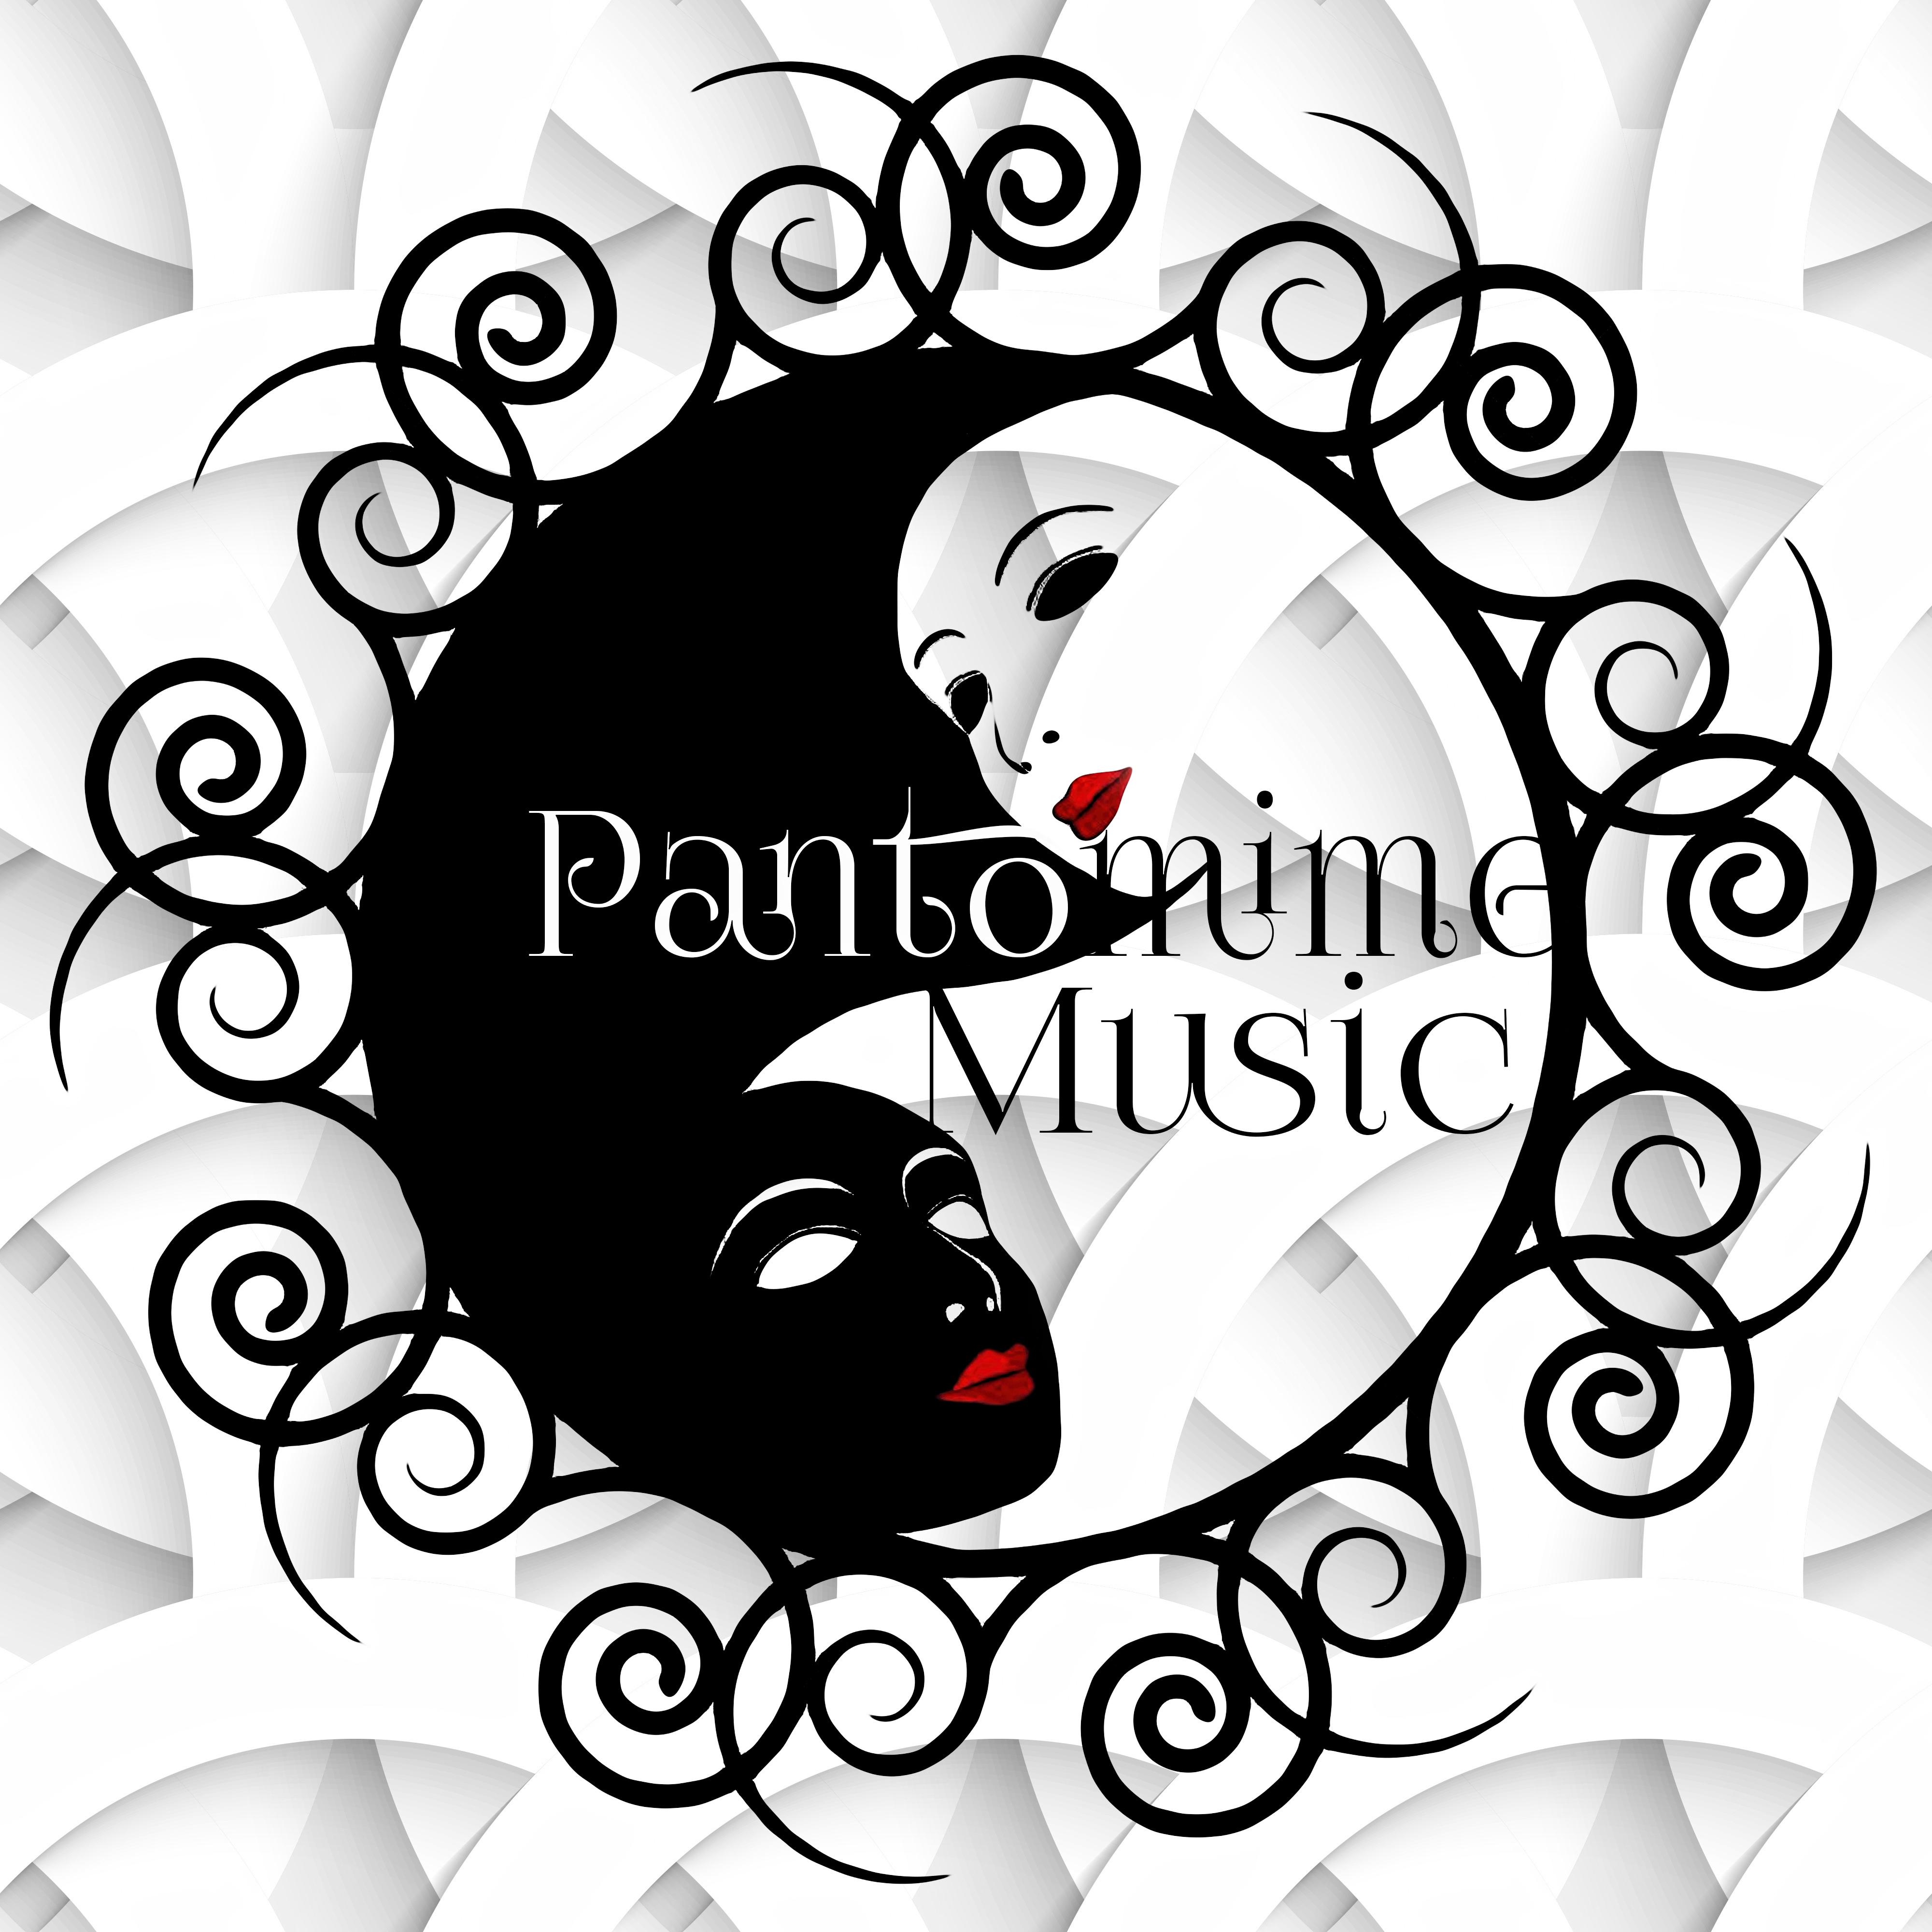 Pantomime Music  Bach, Beethoven, Mozart Music, Classical Music for Dumb Show, Mummery  Masquerade with Classic Style, Scene Music to Theatre, Mime with Timeless  Mood Music